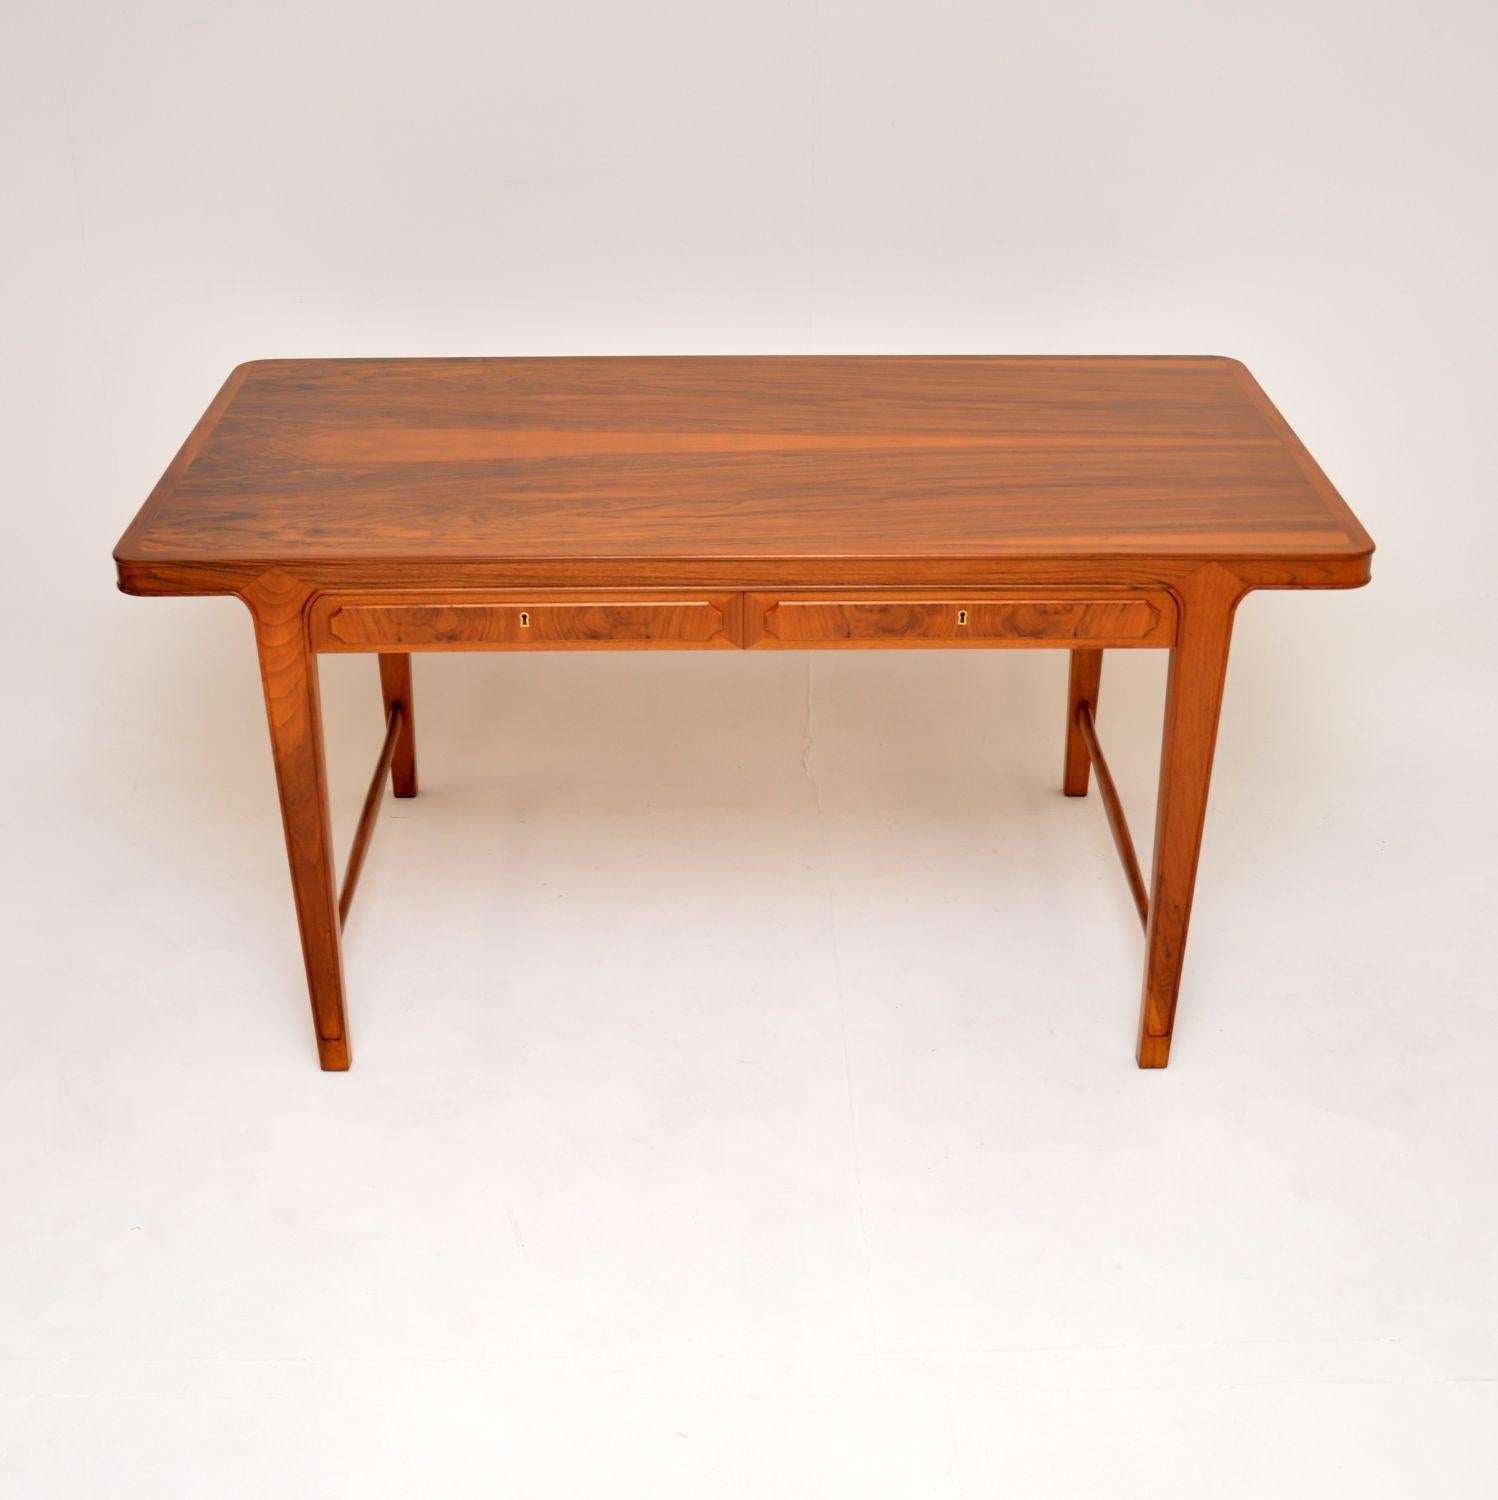 A stunning and extremely well made large 1960’s vintage walnut desk, which was recently imported from Sweden.

The quality is exceptional, this is beautifully constructed and its a great size. It’s made from walnut which has a gorgeous colour tone